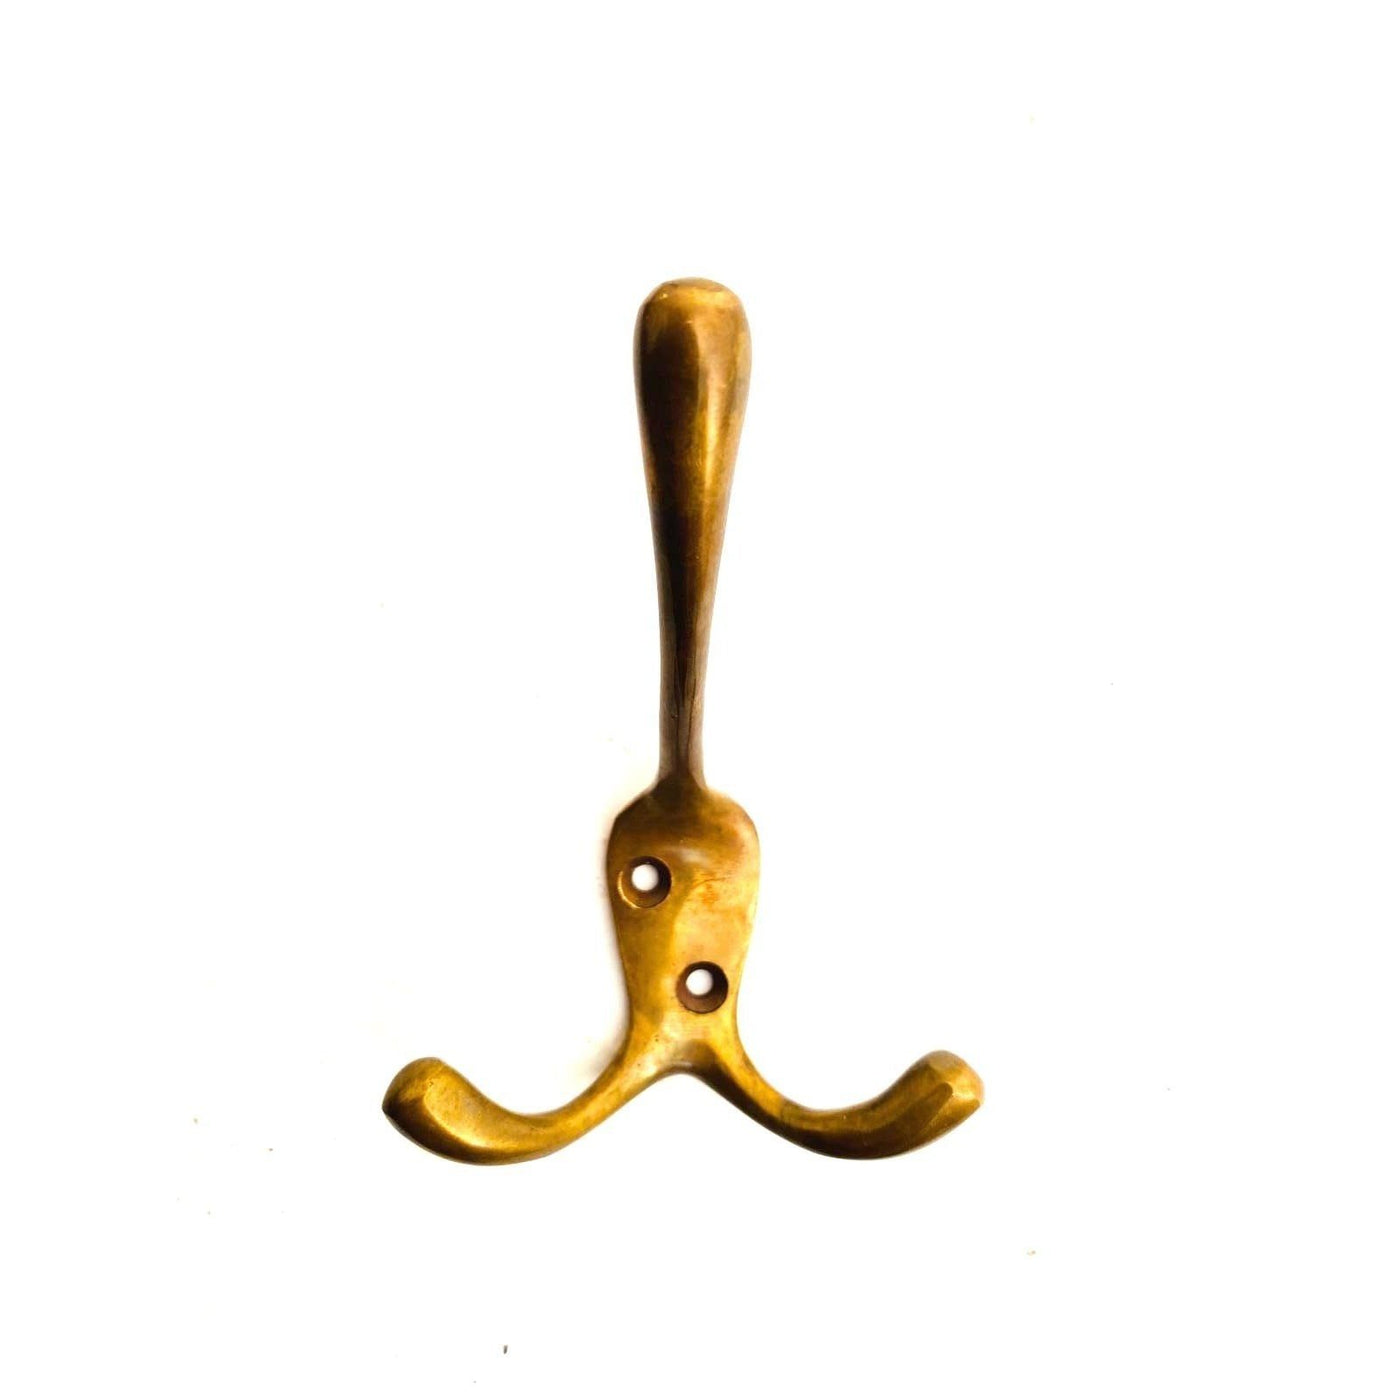 Solid BRASS coat hook - TRIPLE STYLE - Antique style finish – FOWLERS